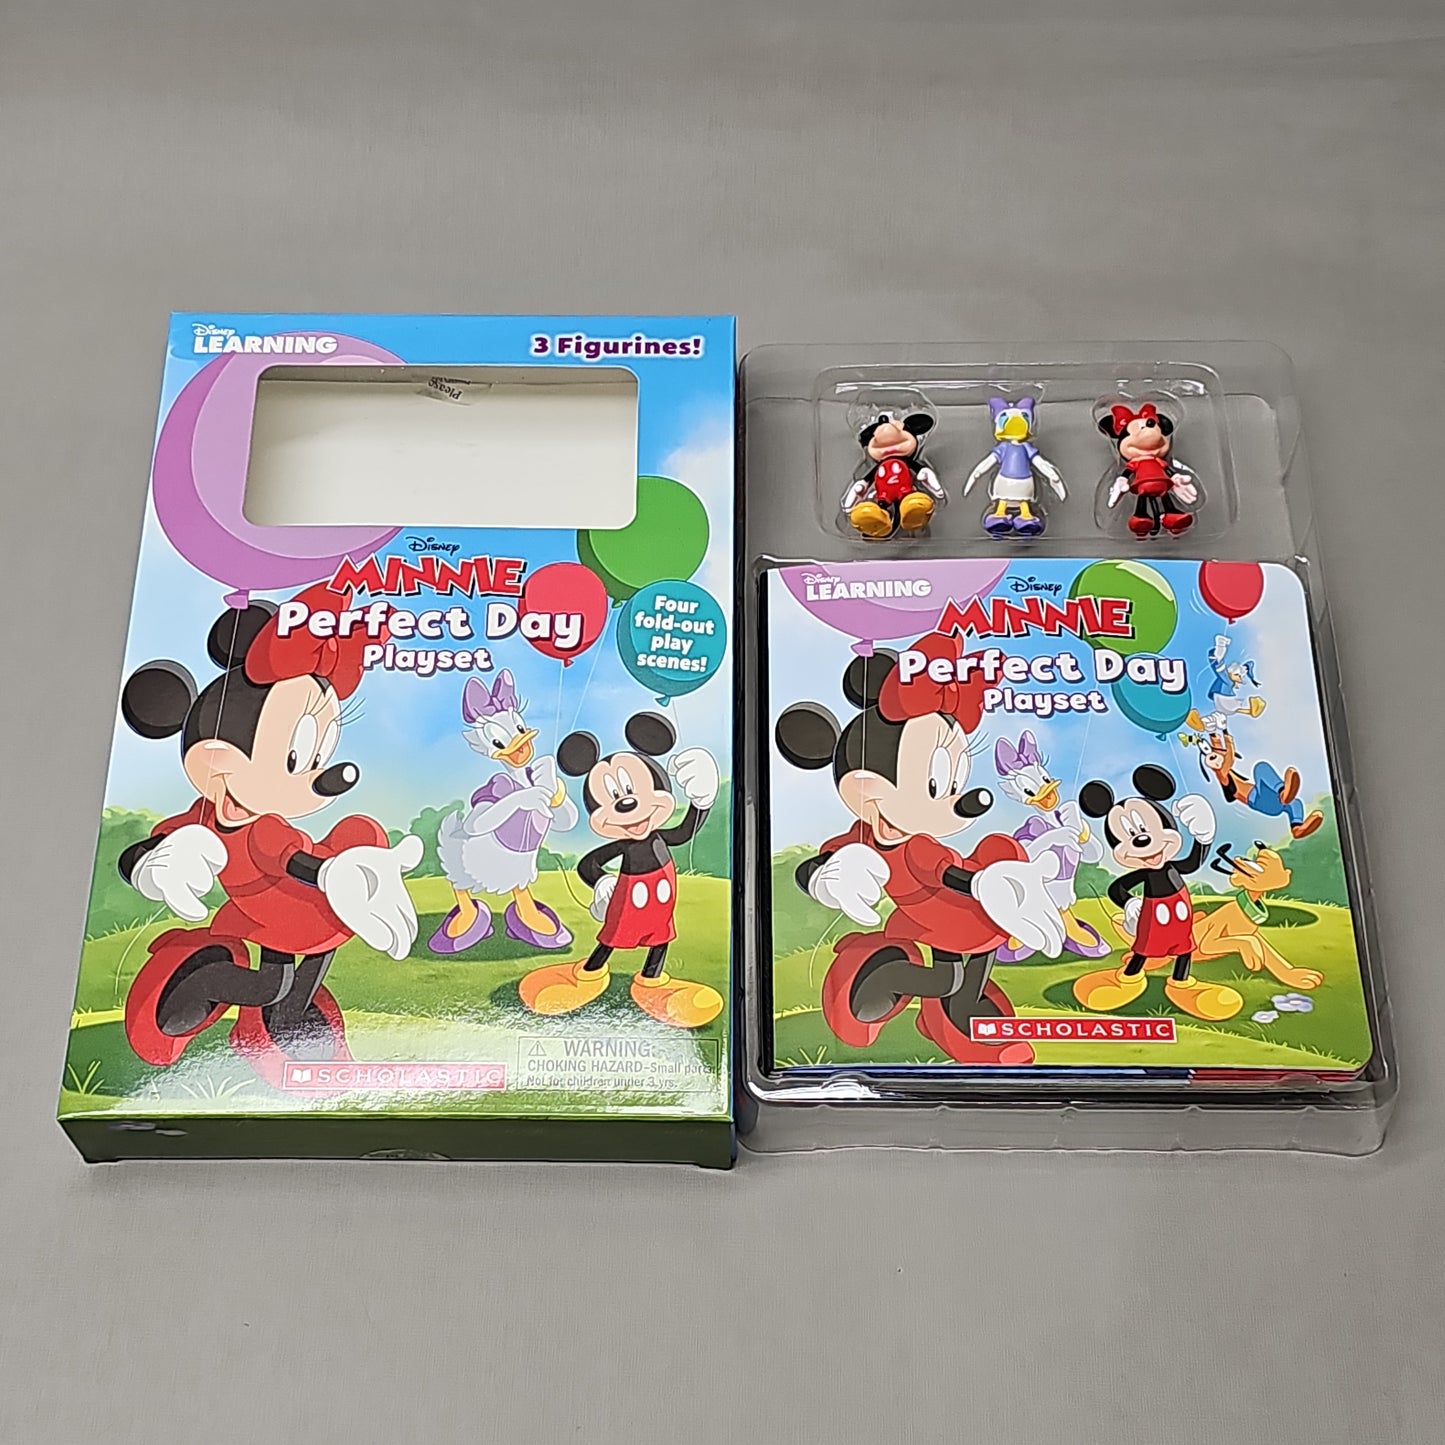 SCHOLASTIC DISNEY Minnie Perfect Day Playset With Book & Figurines (New)